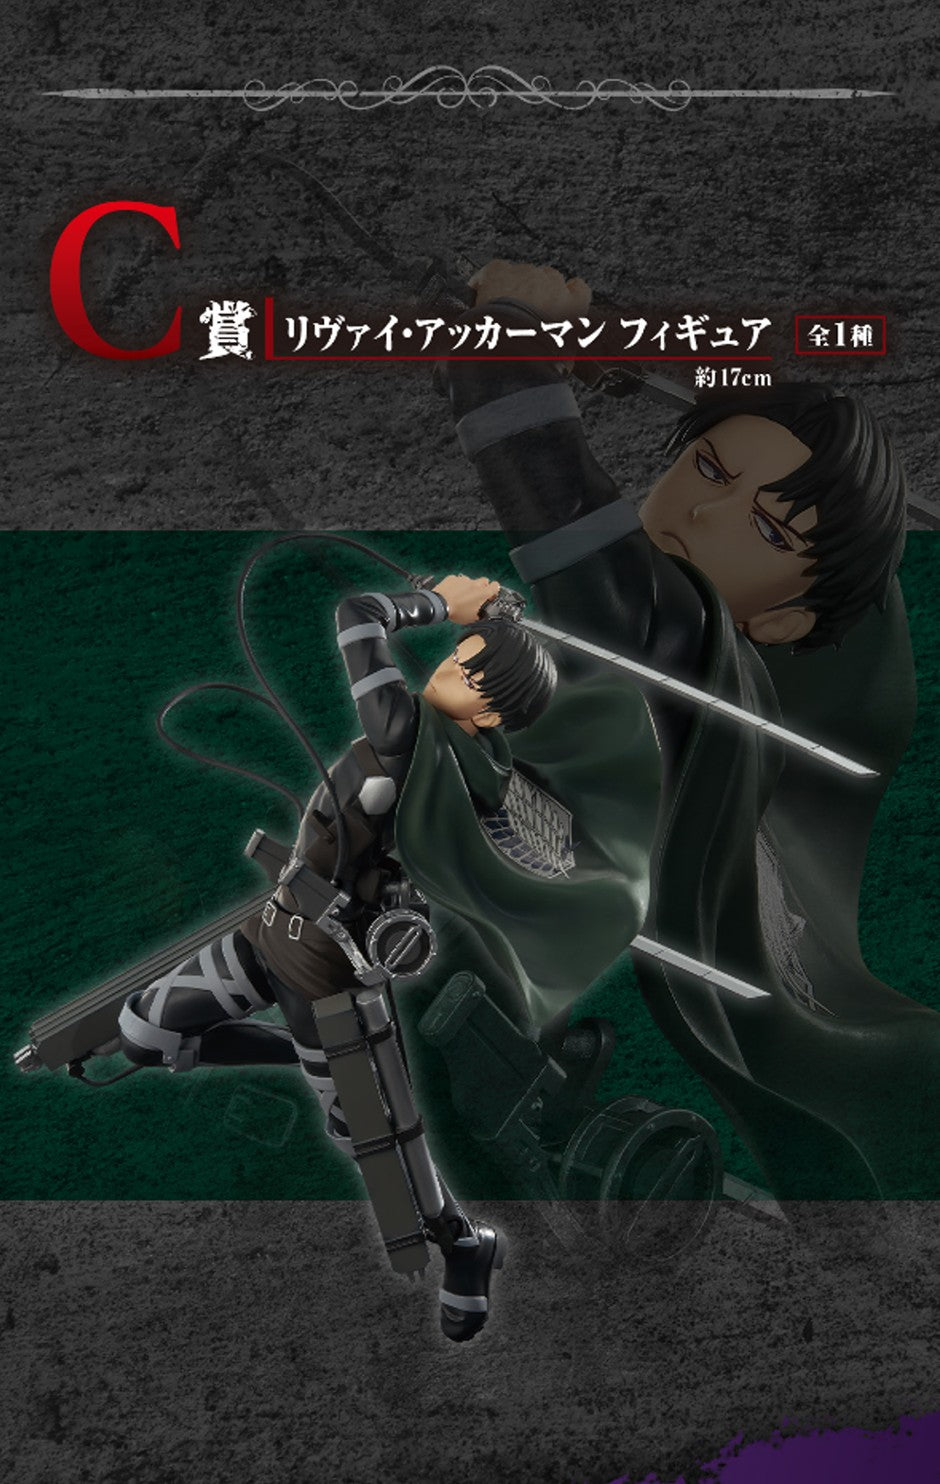 Pre-Order Ichiban Kuji Attack on Titan (進撃の巨人) - In Search of Freedom - Prize C